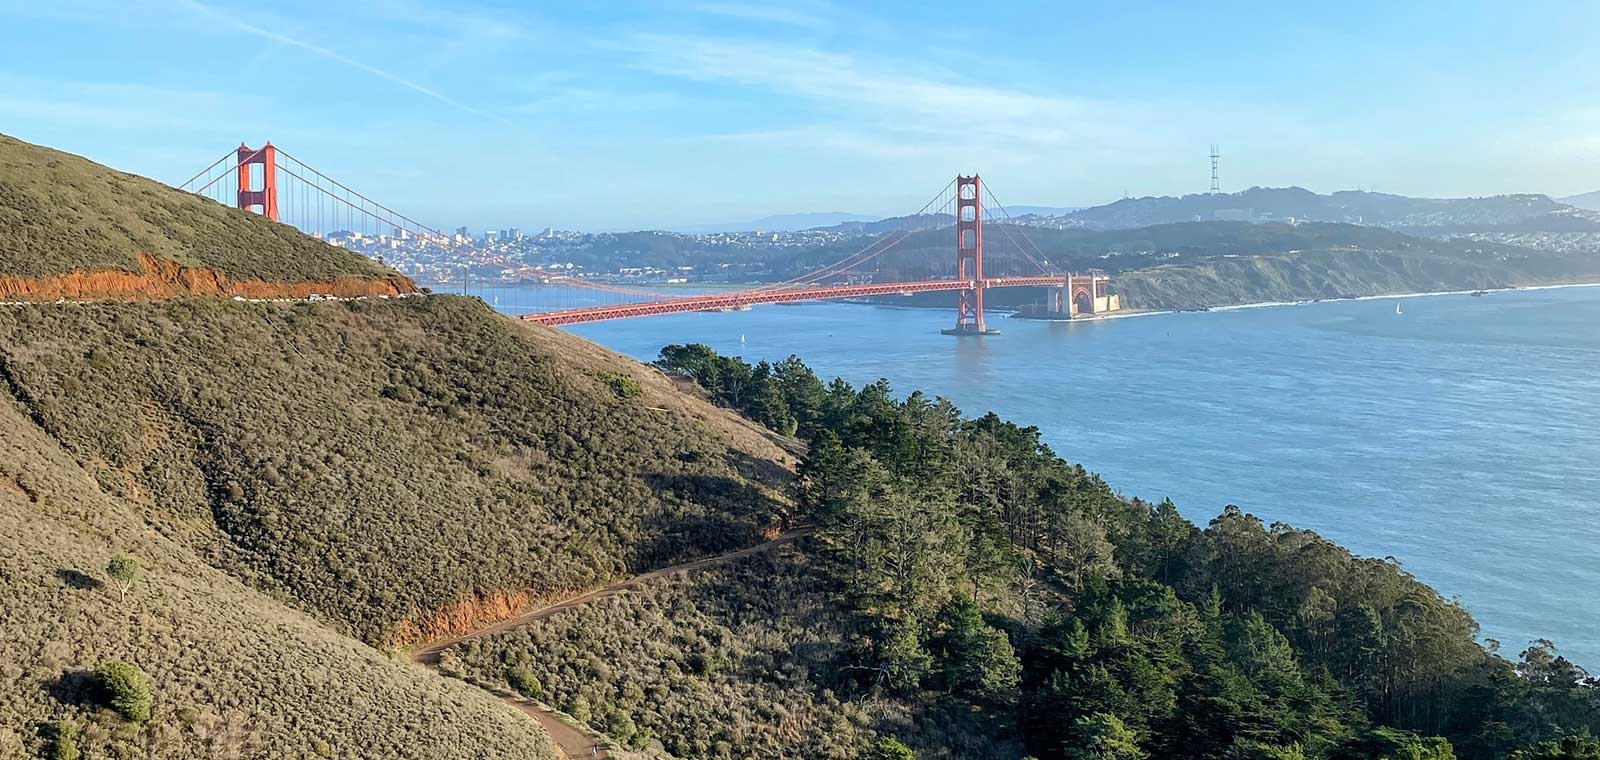 View of Golden Gate Bridge and Bay